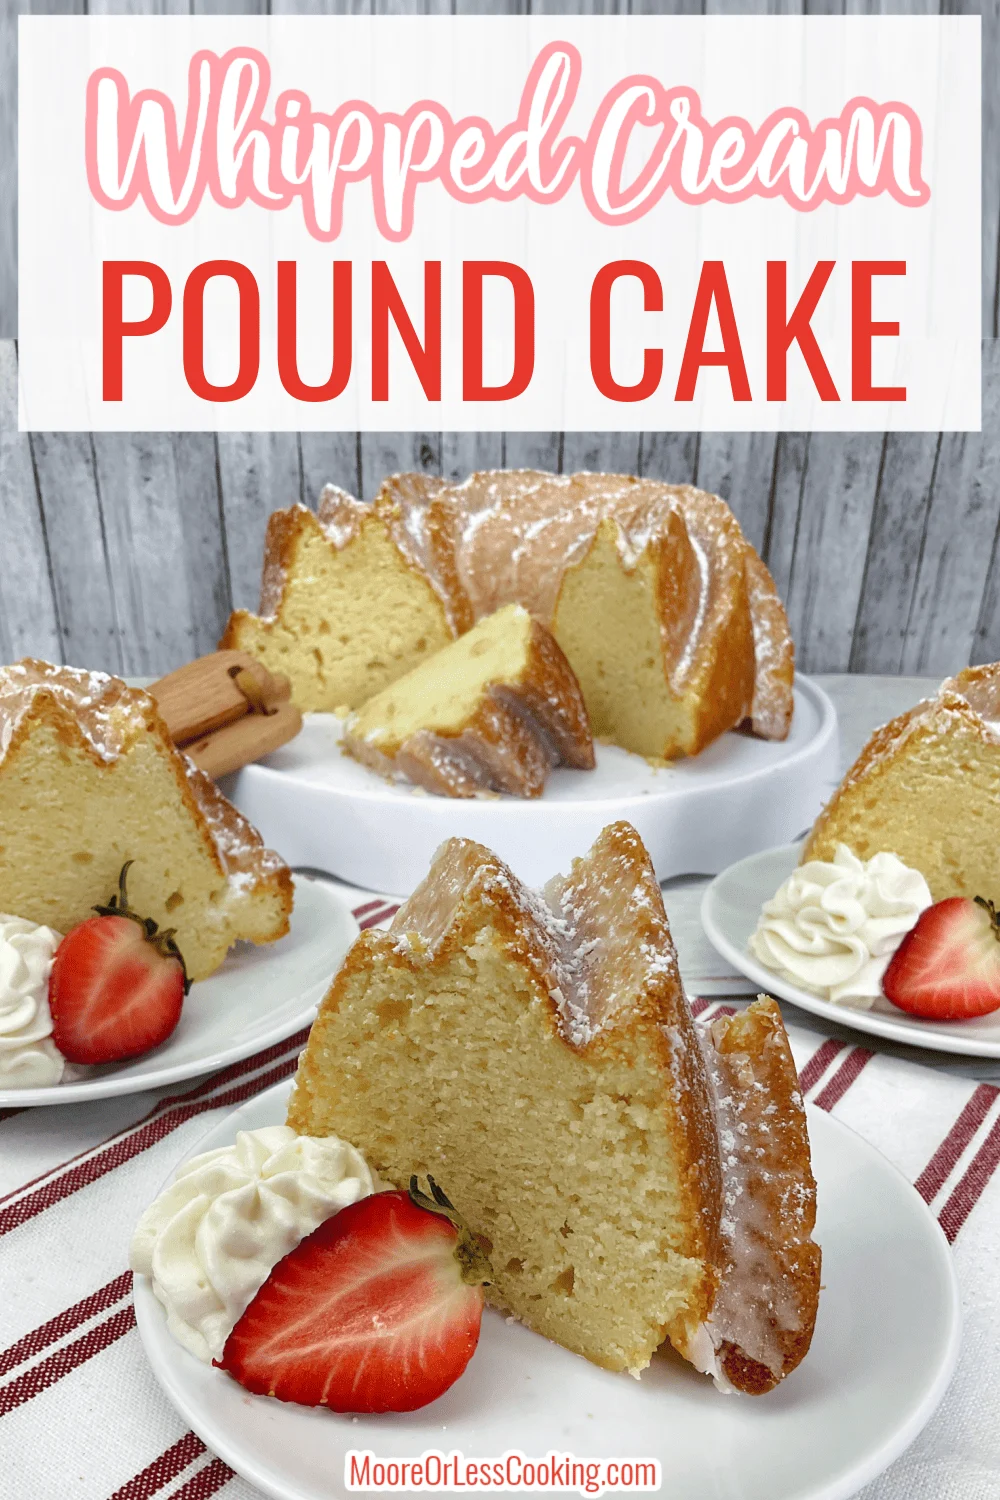 Indulge in this rich and buttery Whipped Cream Pound Cake that's perfect as an elegant after dinner dessert or to have for brunch with a cup of coffee on a lazy weekend. With its vanilla flavor and tender crumb, it's a delicious cake that's always a hit, especially when the family smells its enticing aroma as it bakes! via @Mooreorlesscook